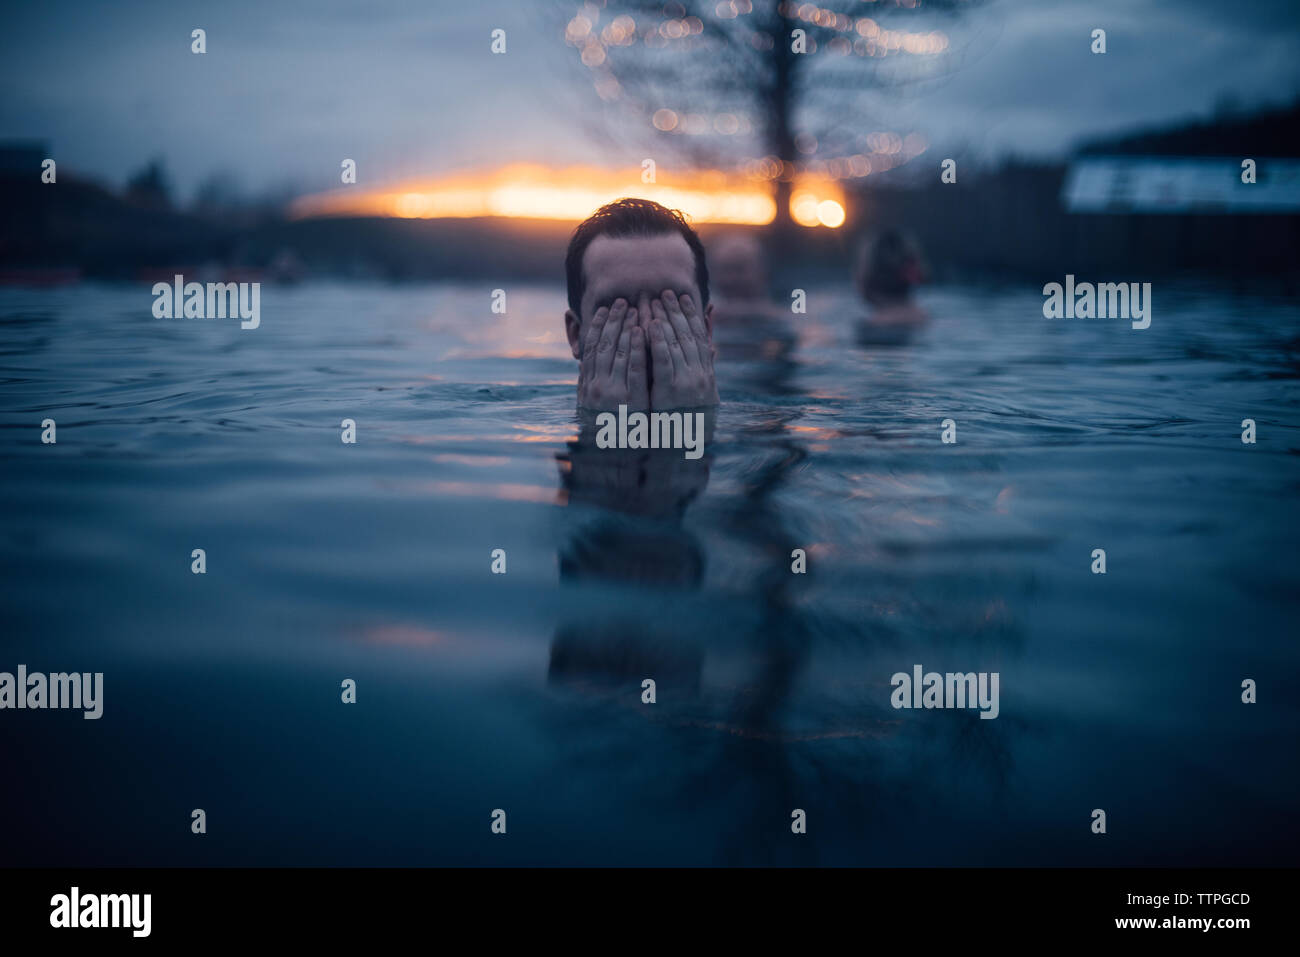 Man Covering His Eyes In The Water At The Secret Lagoon In Iceland Stock Photo Alamy